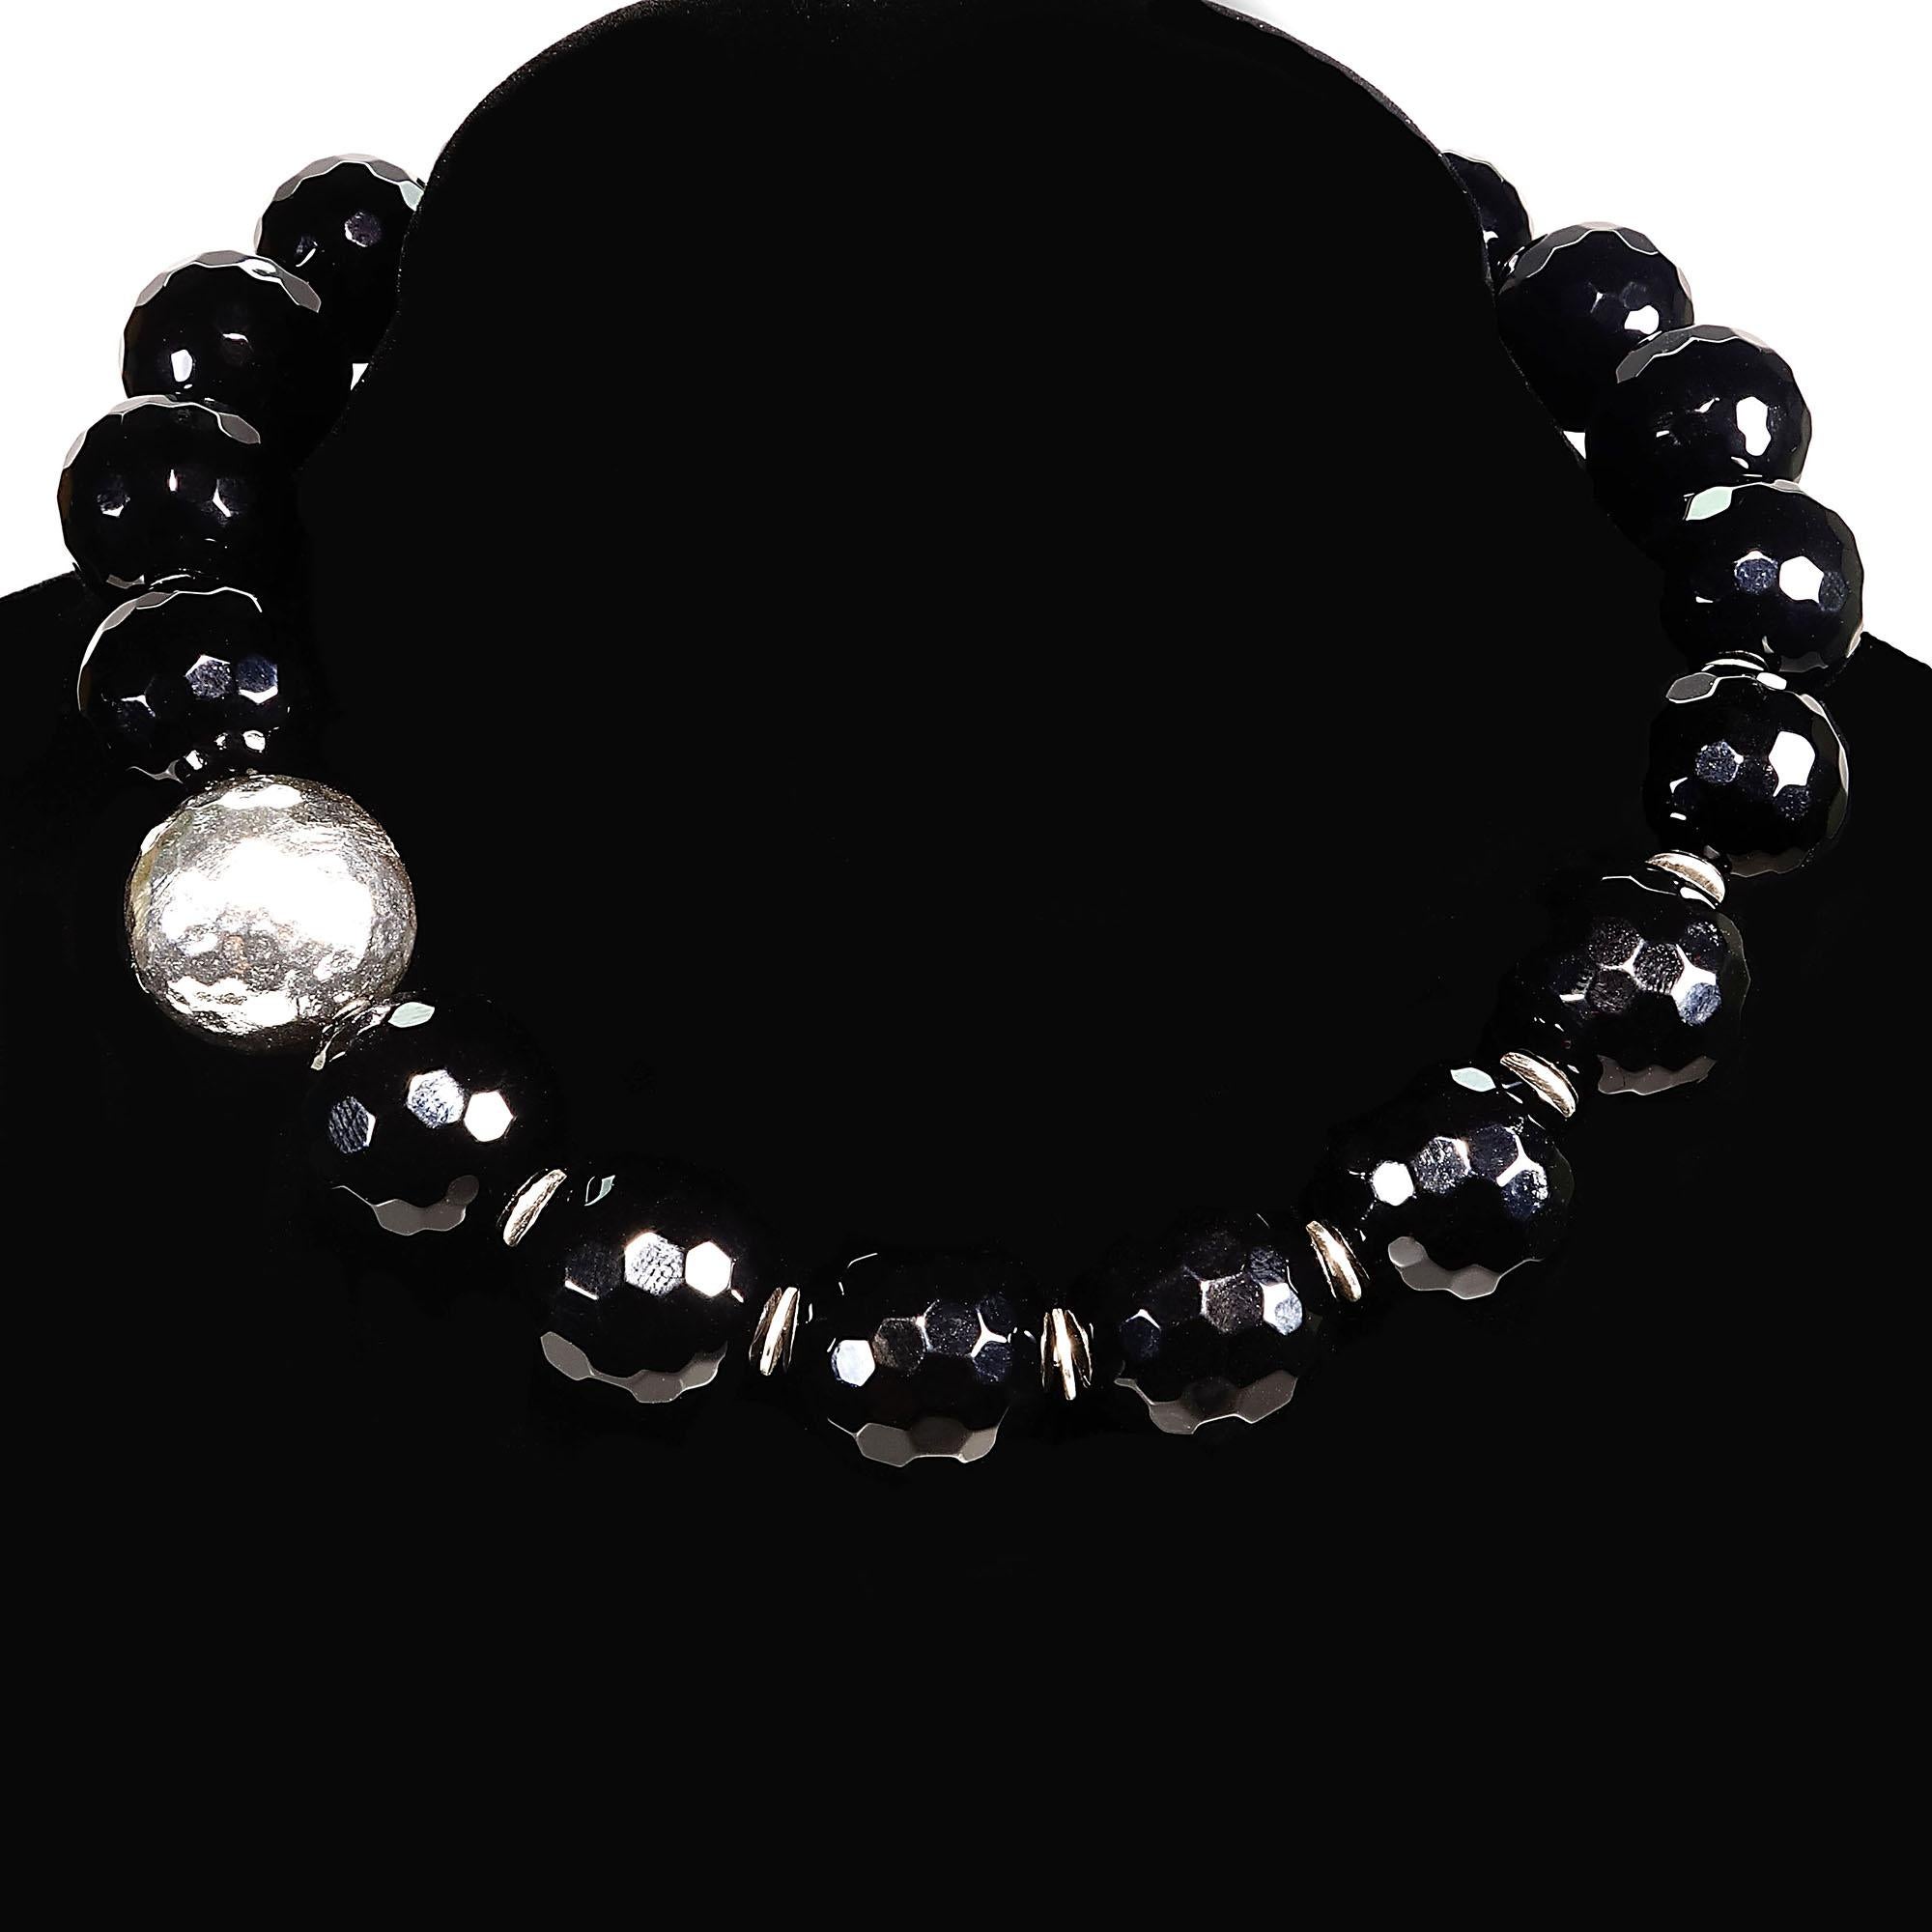 Women's or Men's AJD Elegant Necklace of Black Onyx with Pure Silver Focal